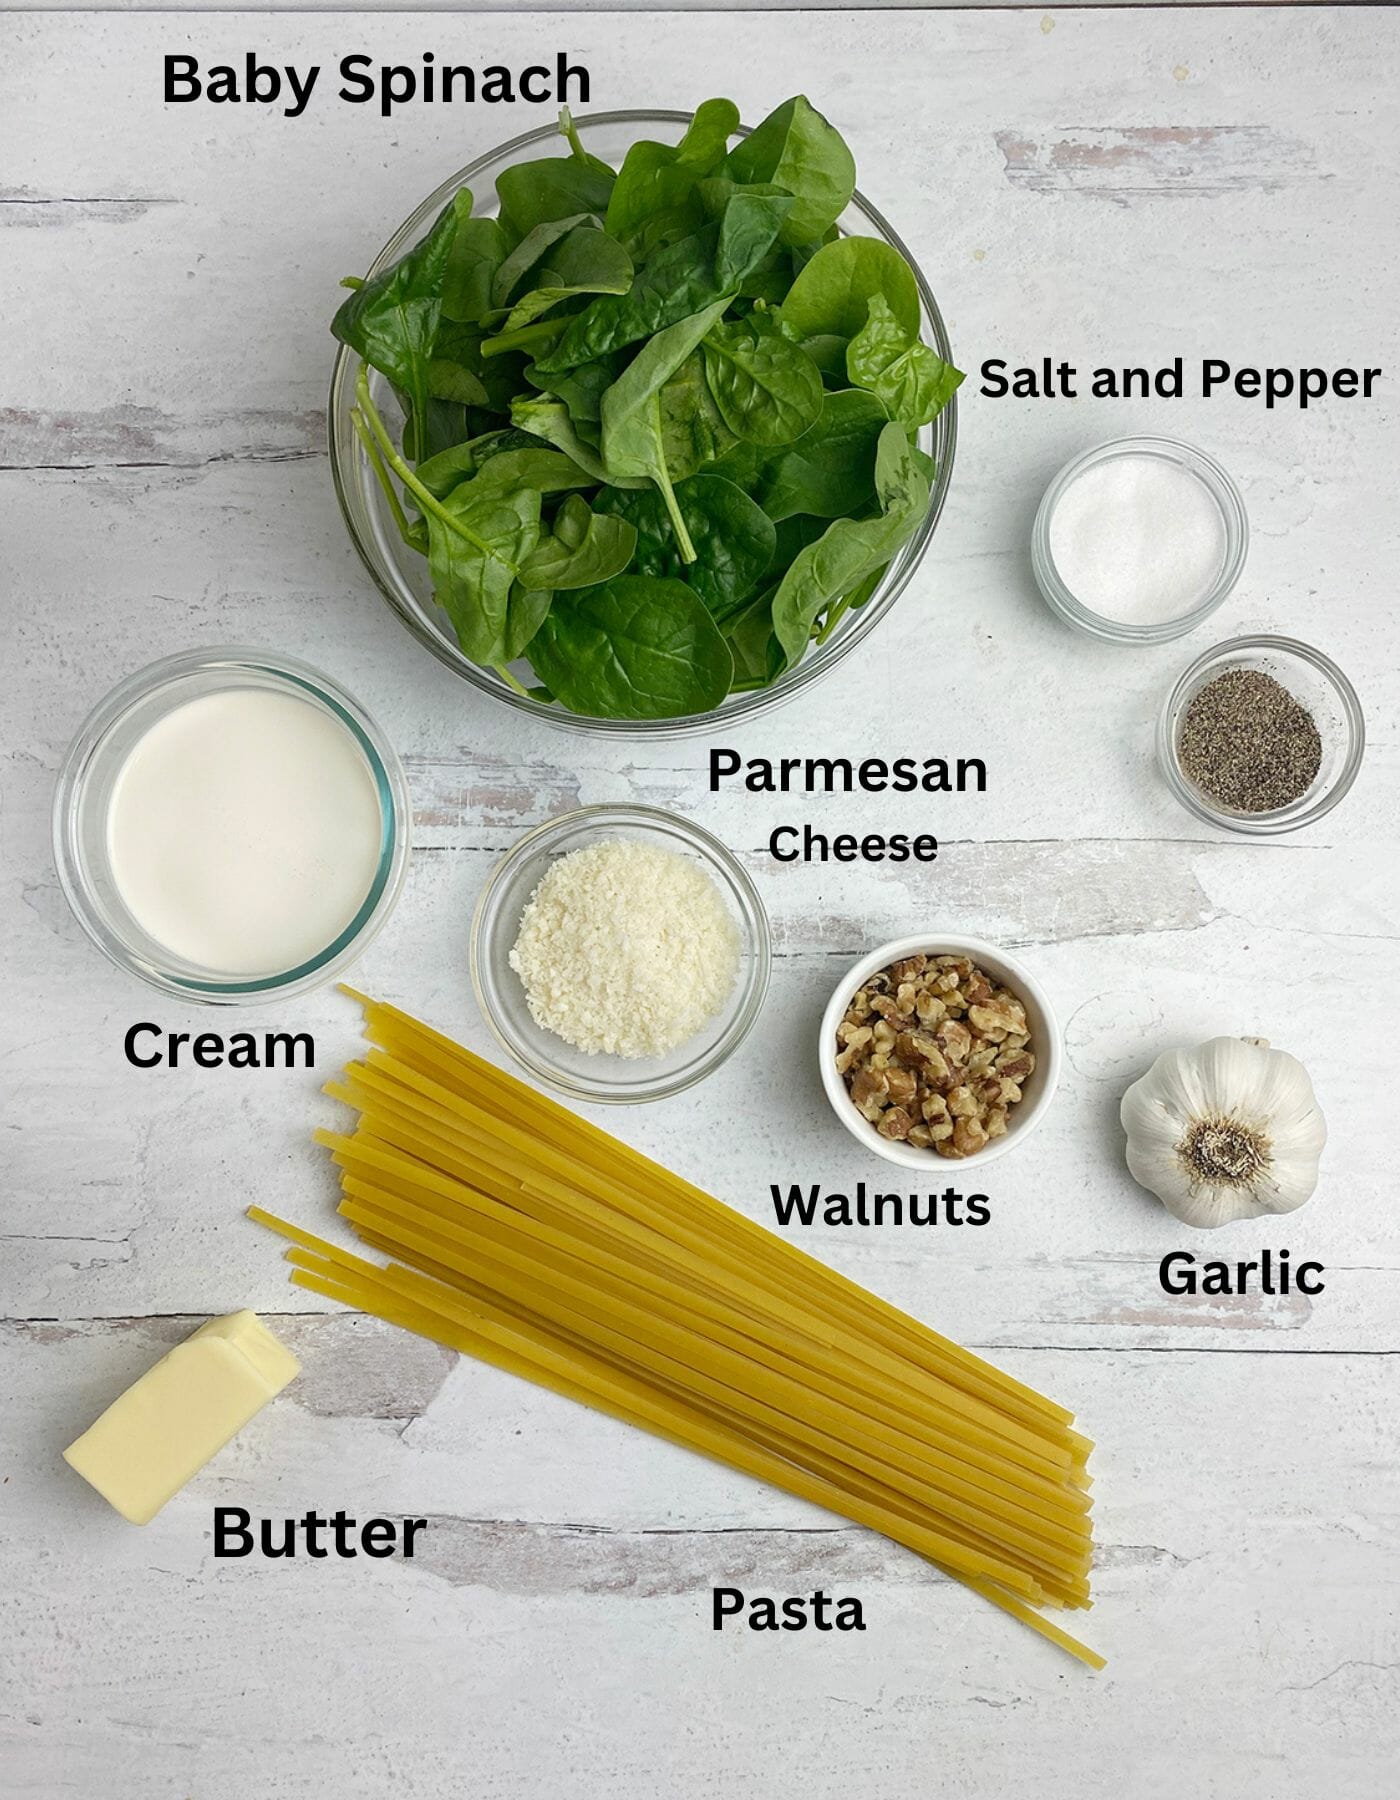 Pasta with creamed spinach sauce Ingredients on a wooden counter.